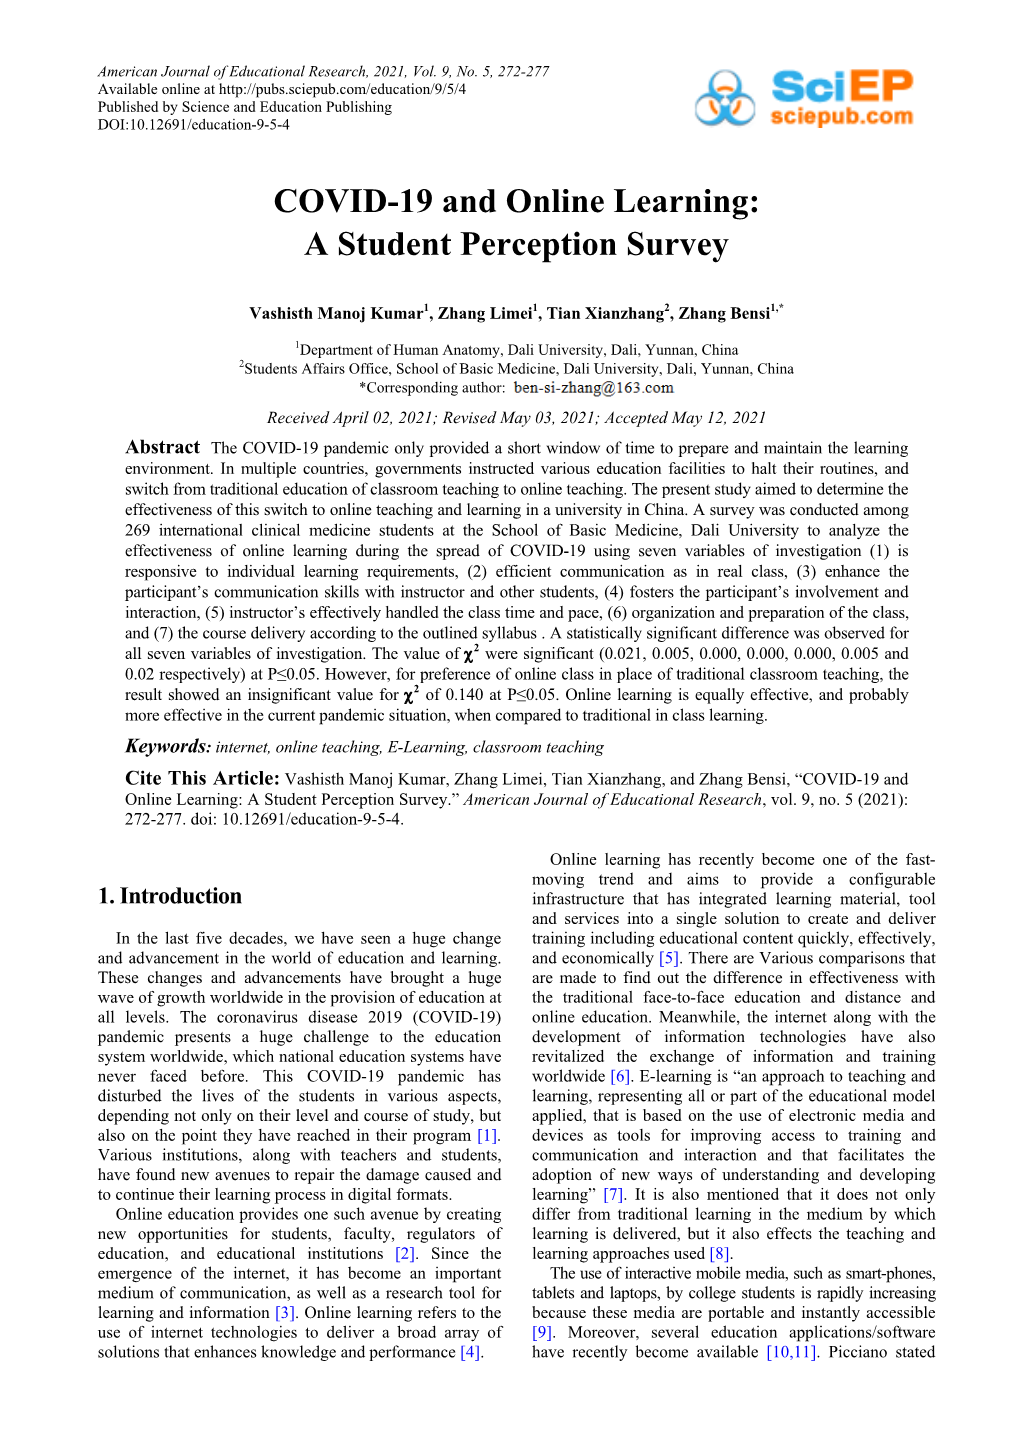 COVID-19 and Online Learning: a Student Perception Survey